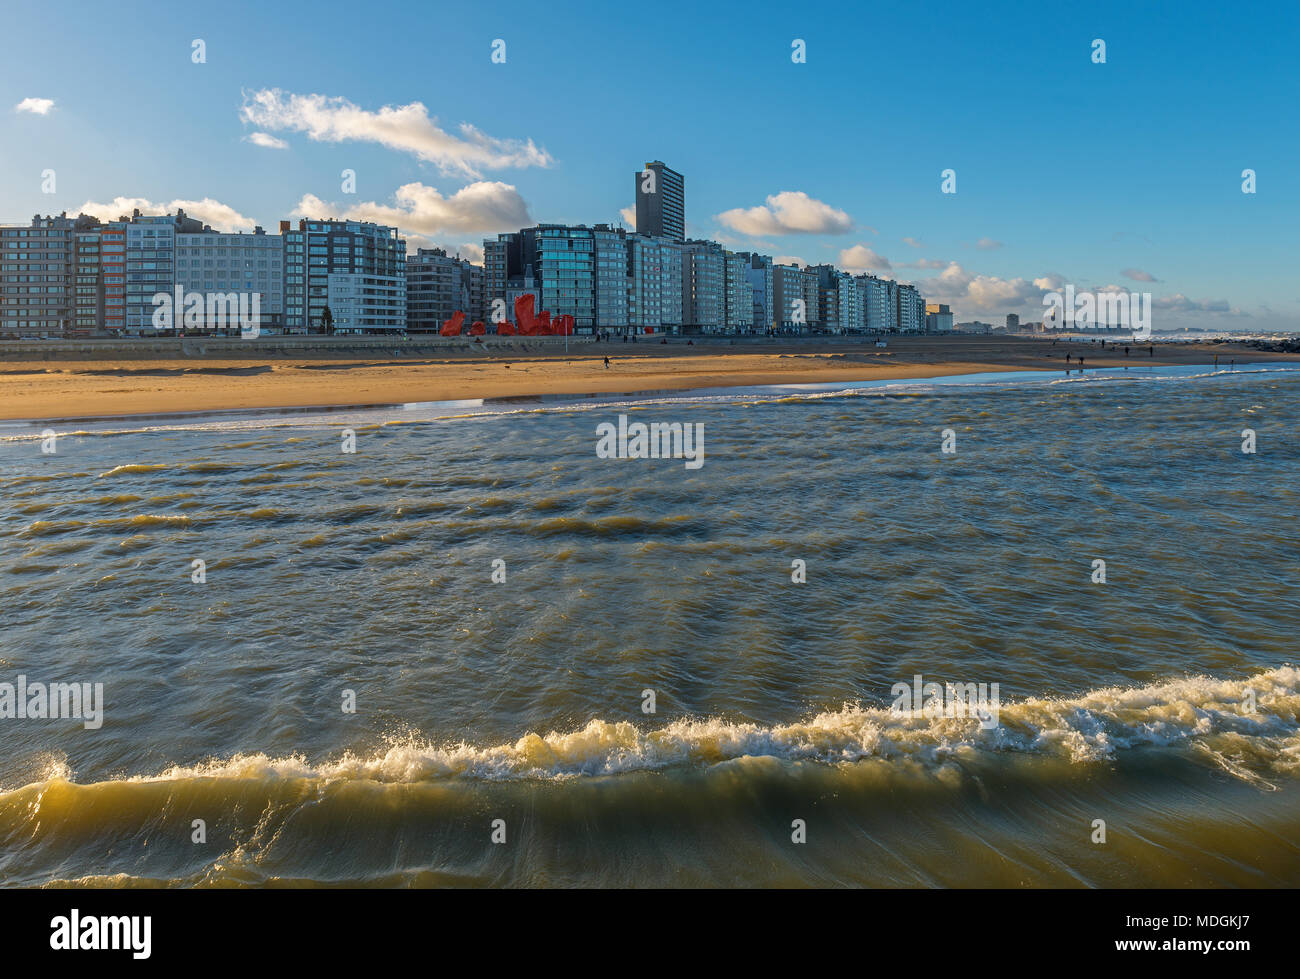 The skyline of Ostend with its apartment buildings and beach by the North Sea, West Flanders, Belgium. Stock Photo